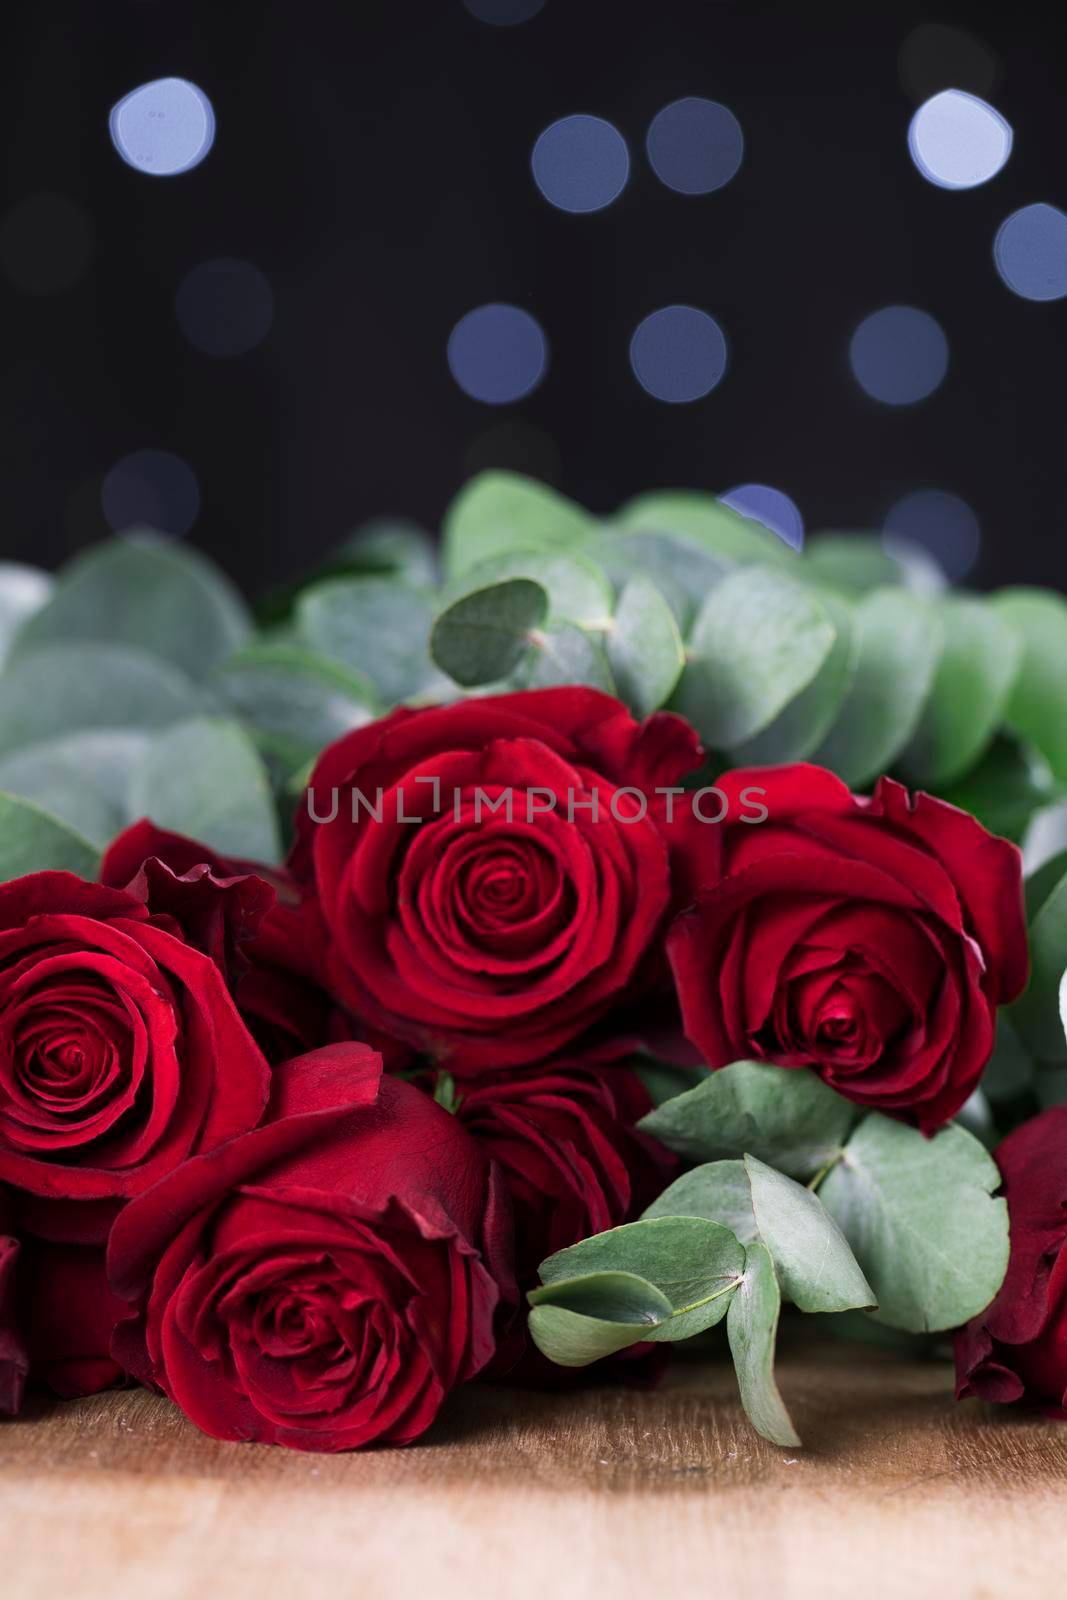 Vibrant red roses with lights in the background, vertical orientation.